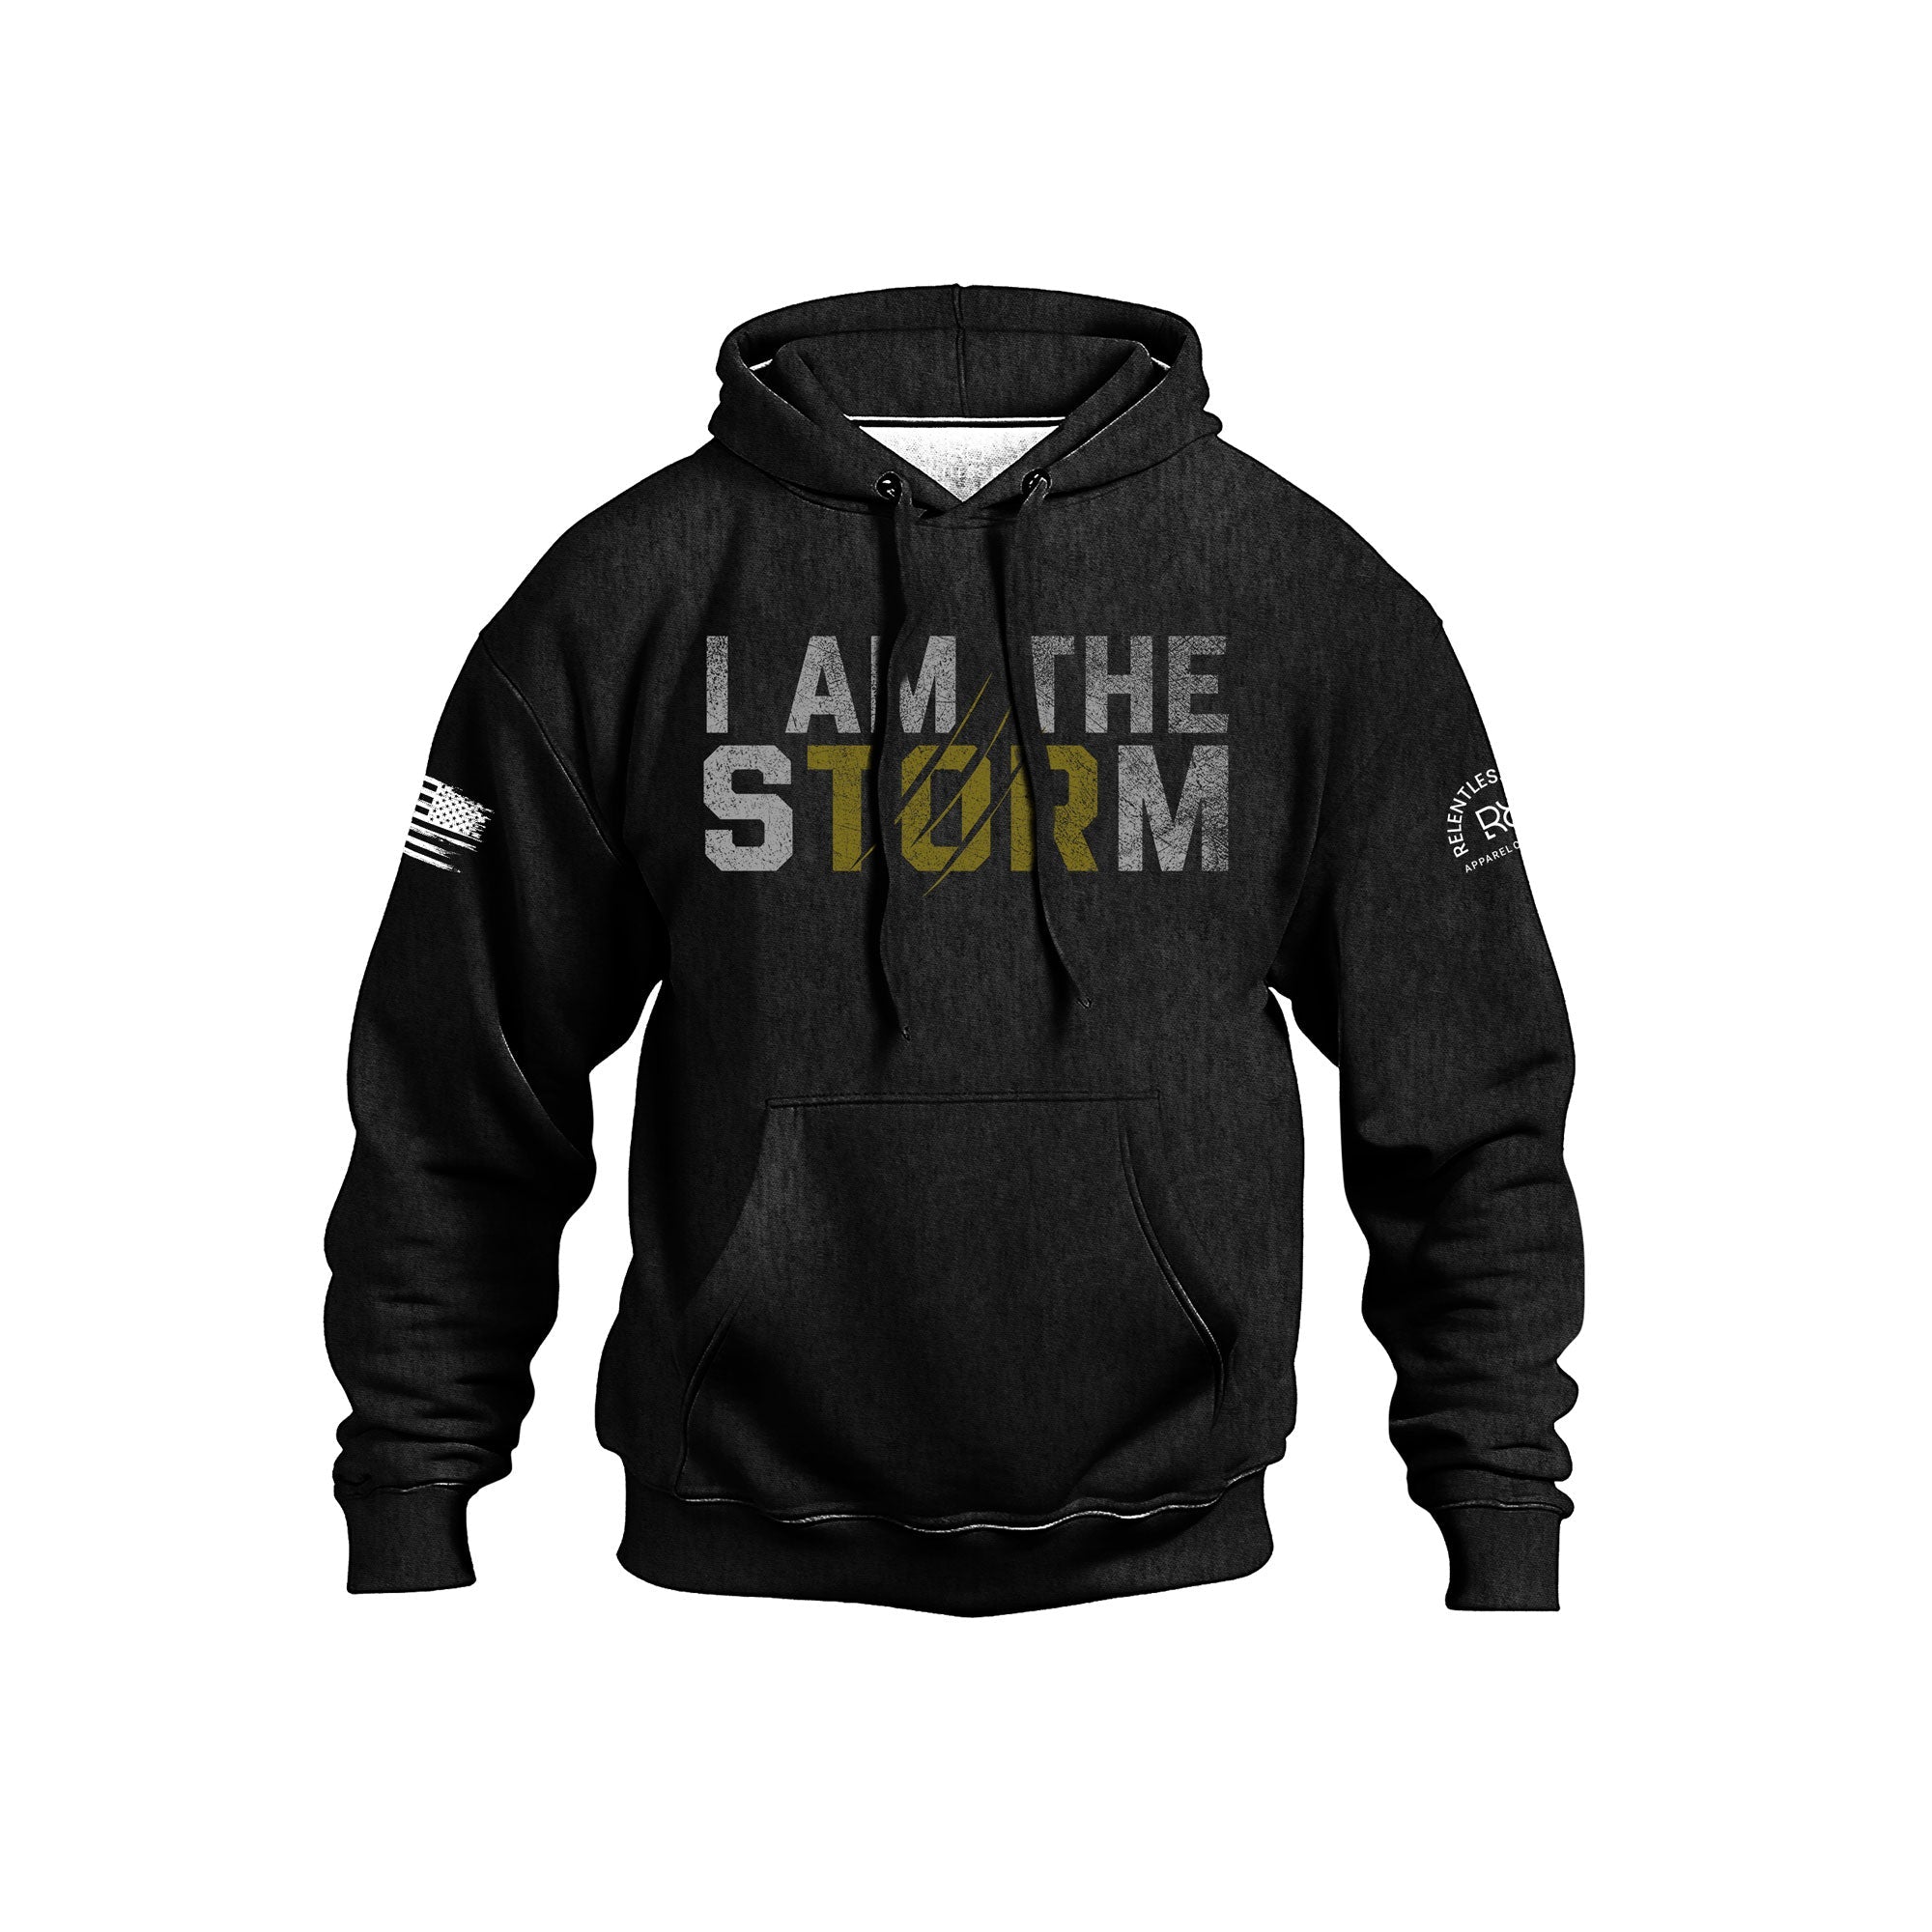 I Am The Storm front design hoodie